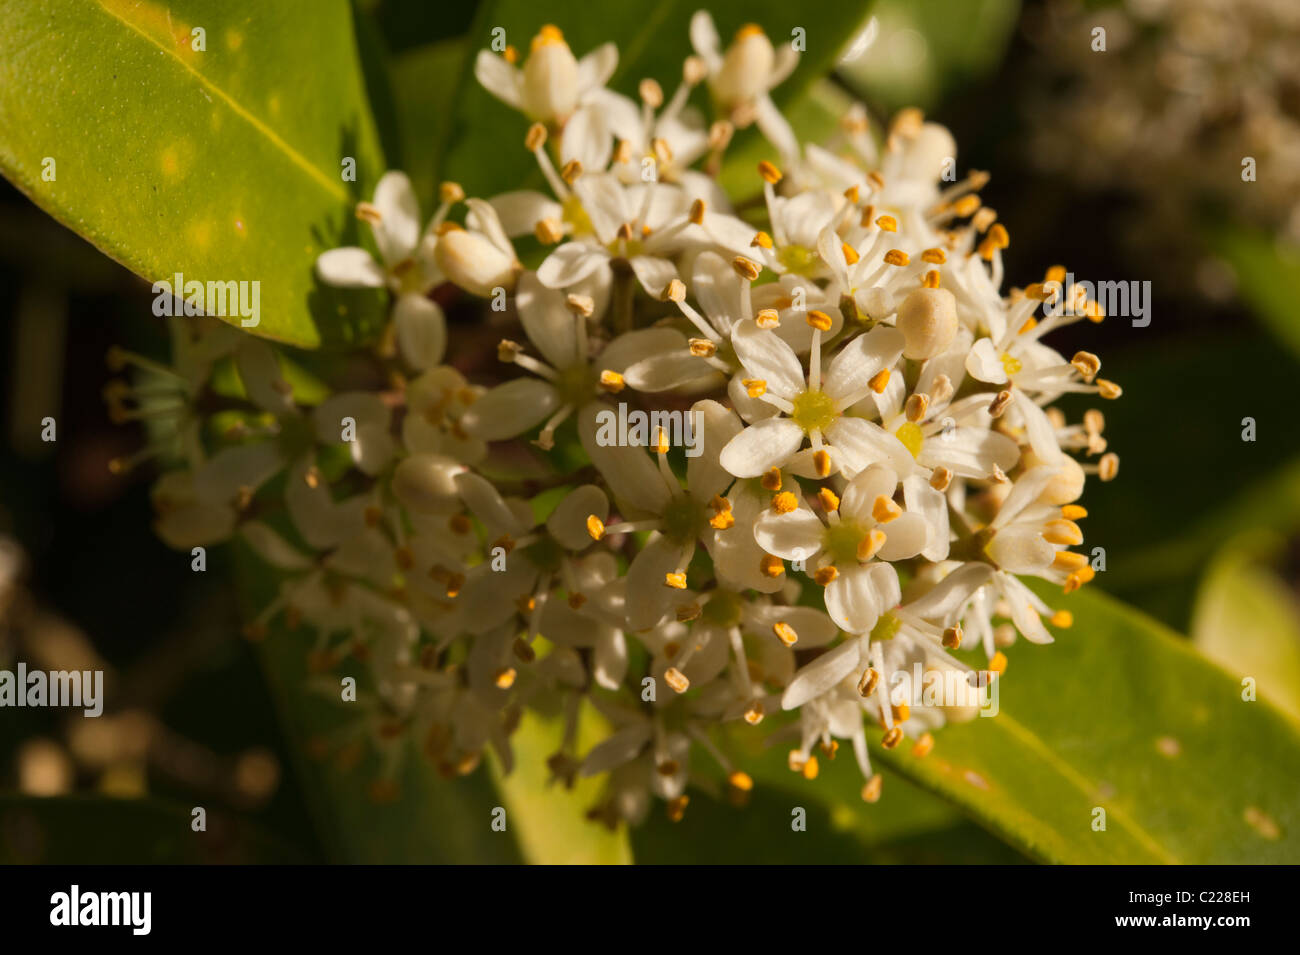 Detail of a flower cluster of Skimmia japonica Fragrans. Stock Photo